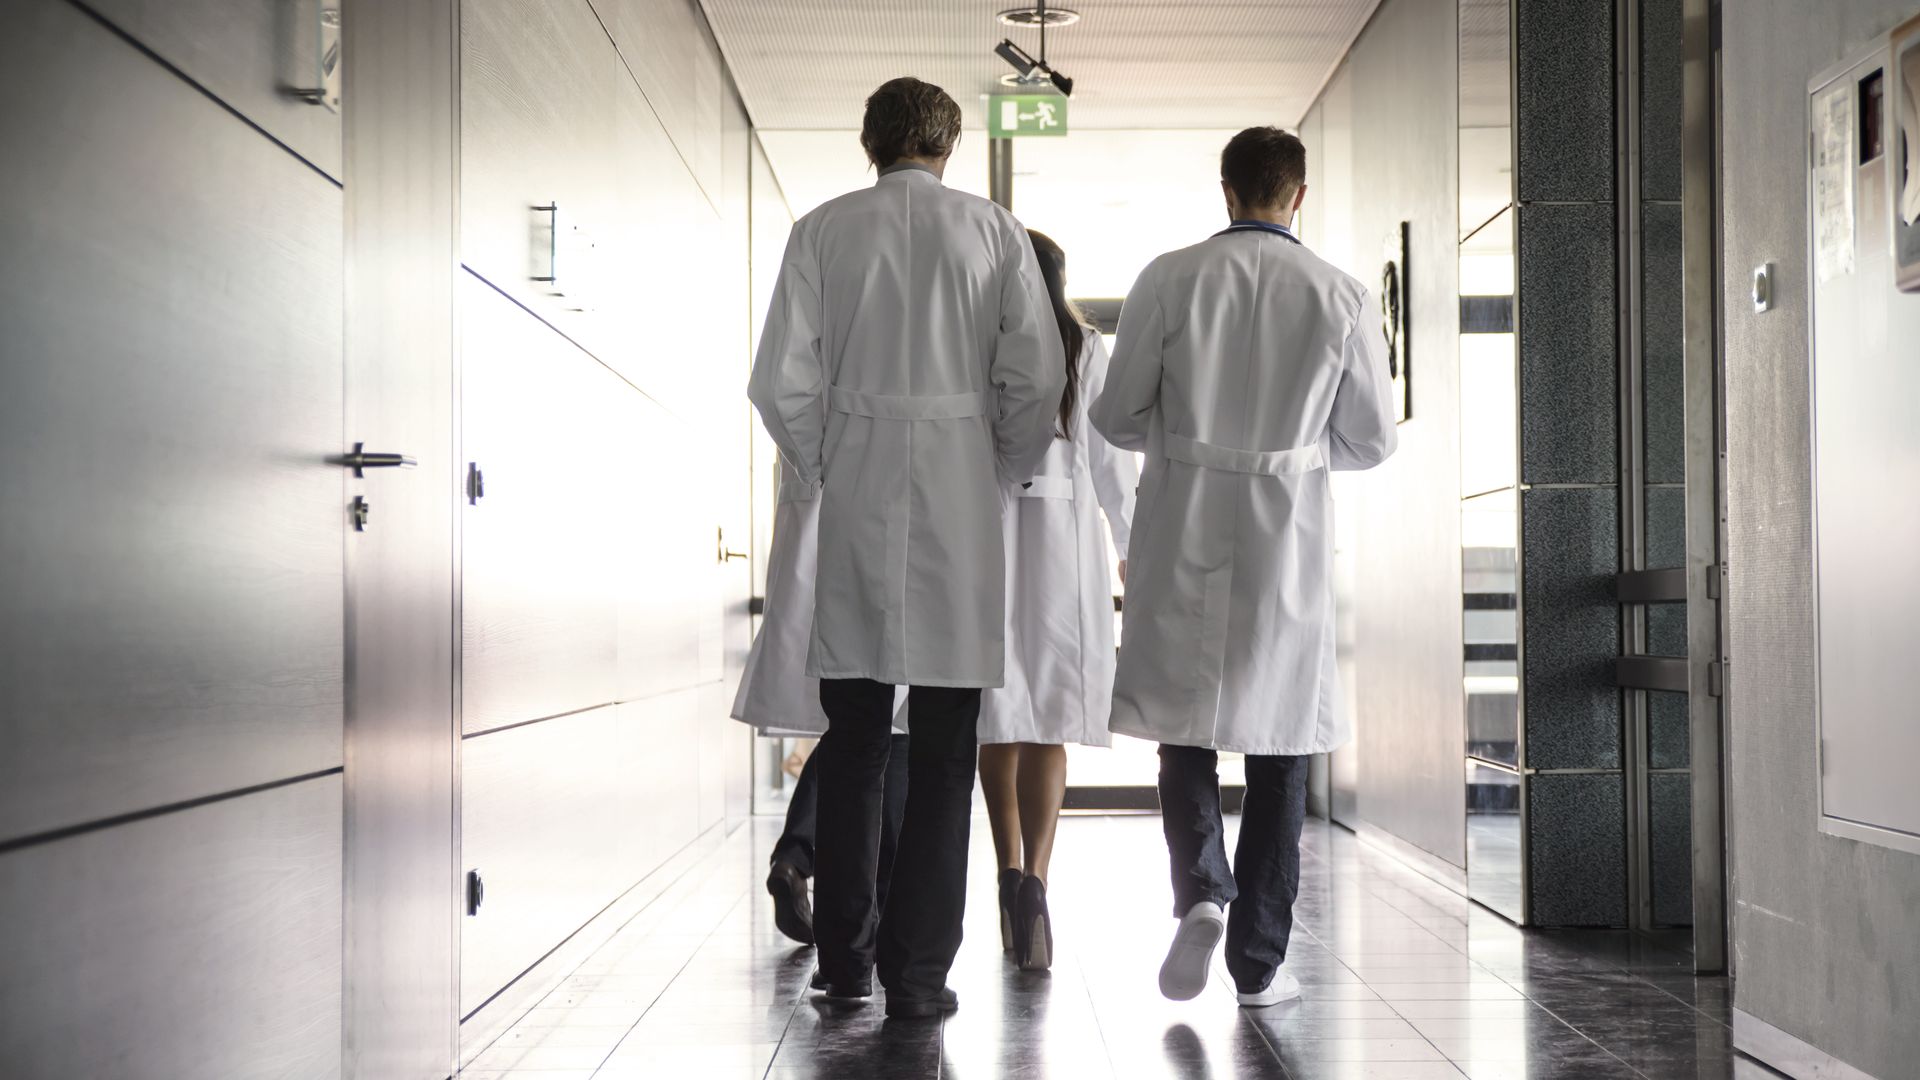 Team of doctors walking down a hall